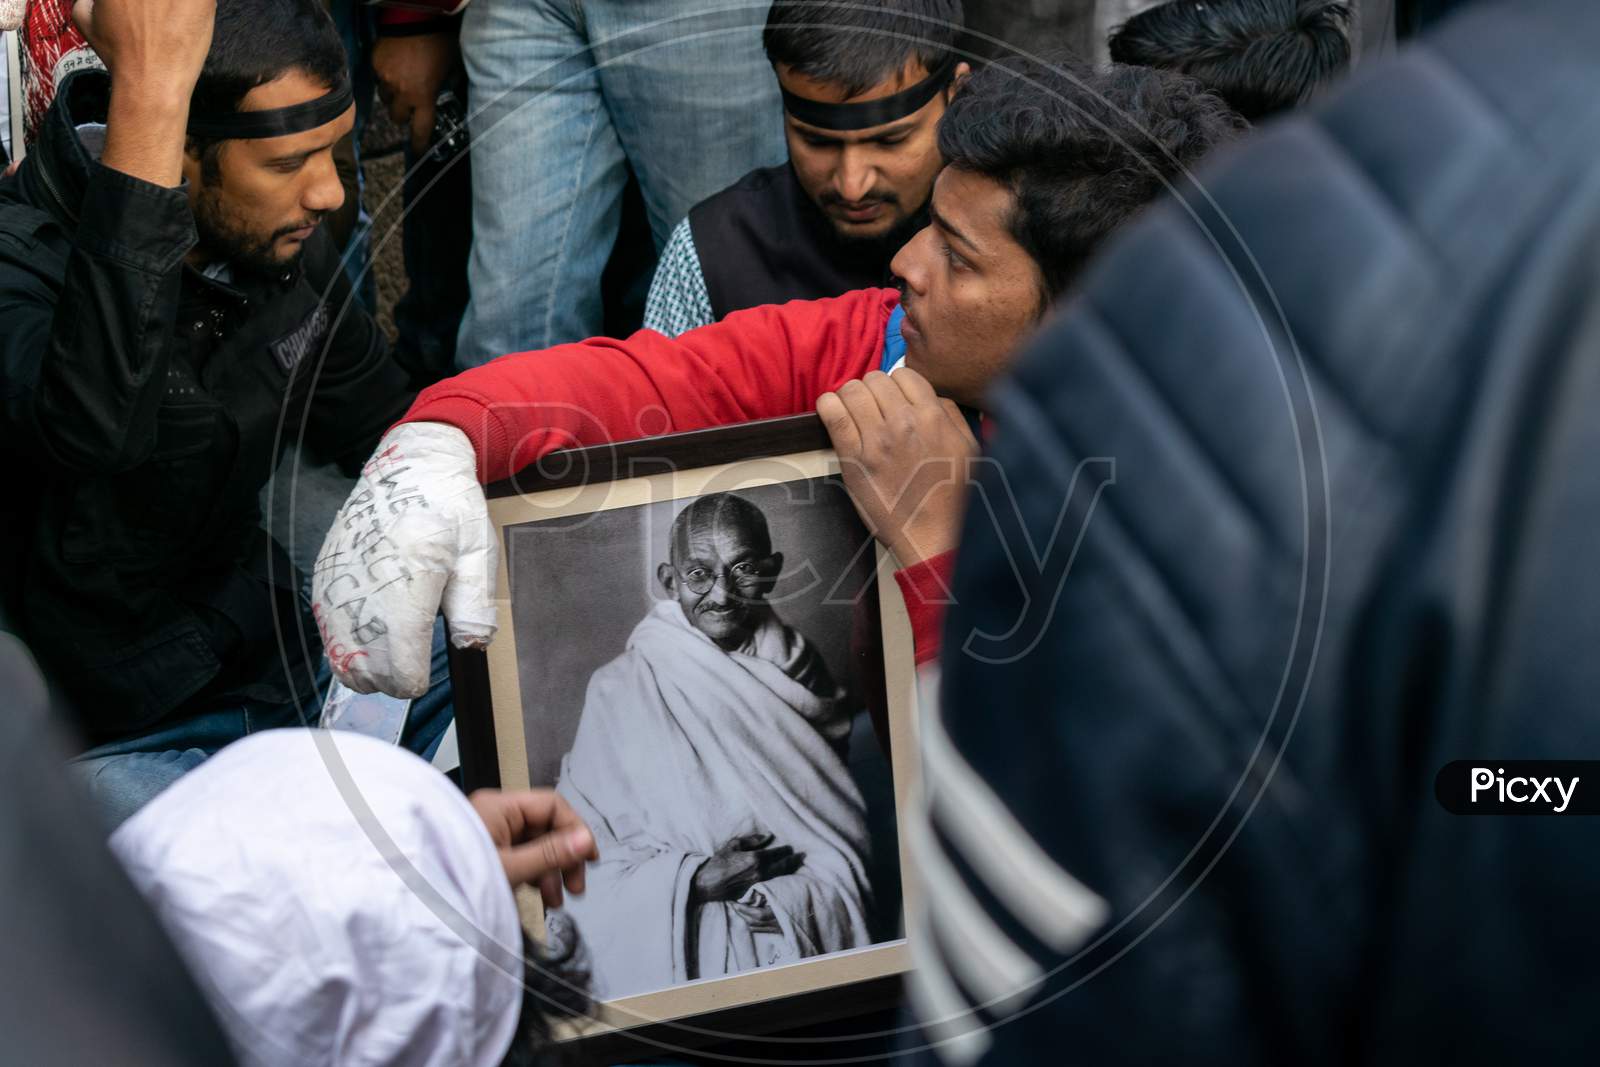 Students holding a picture of Mahatma Gandhi during protest against CAA and NRC outside Jamia Millia Islamia, A Central University in New Delhi